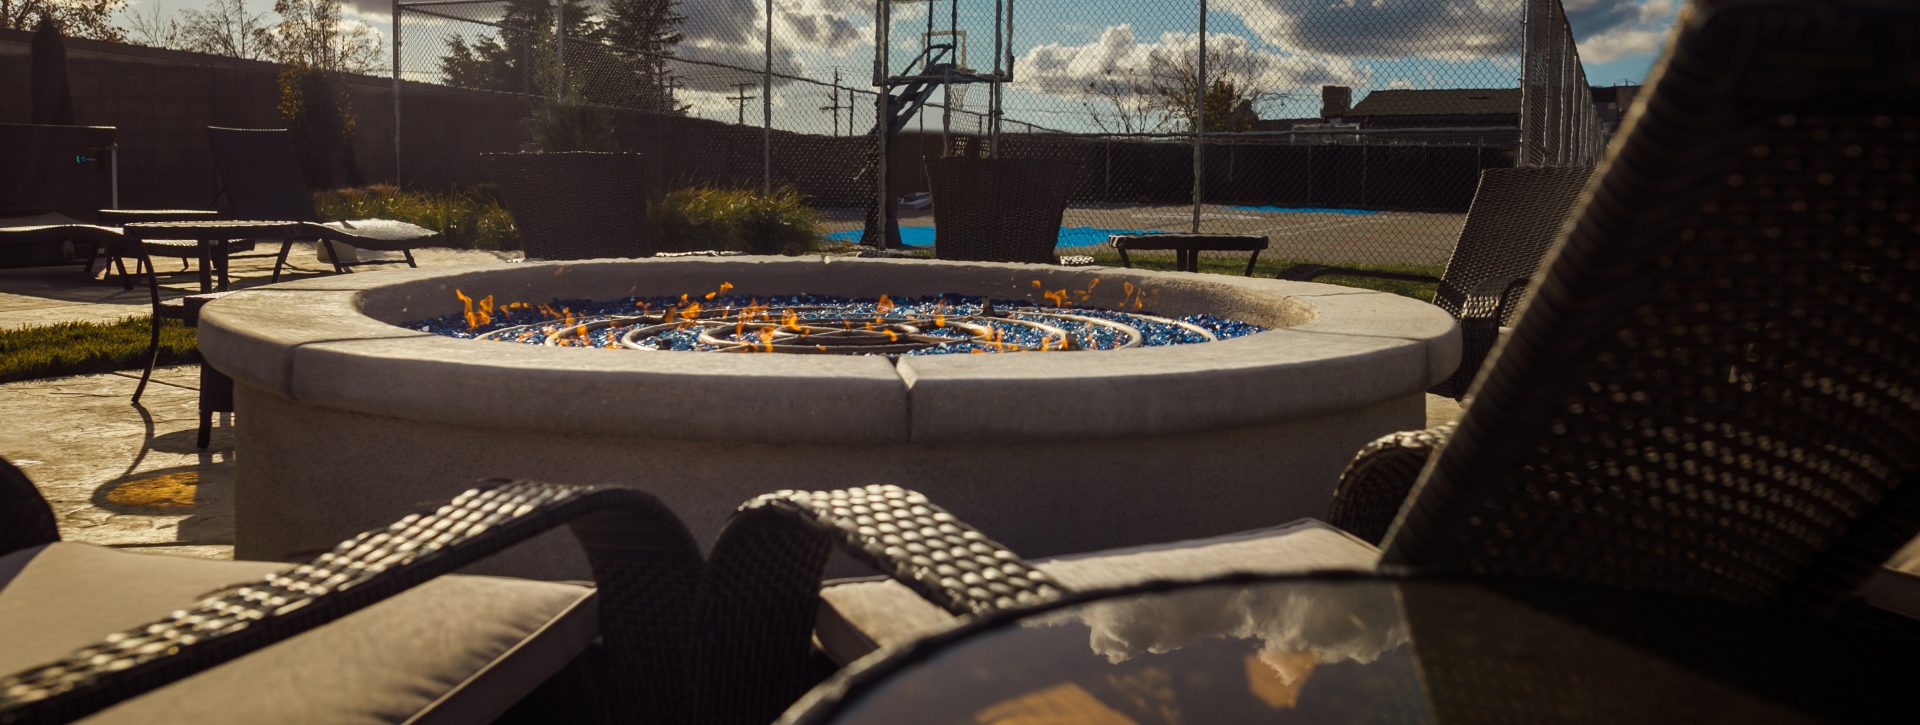 A lit firepit in front of a caged in basketball court